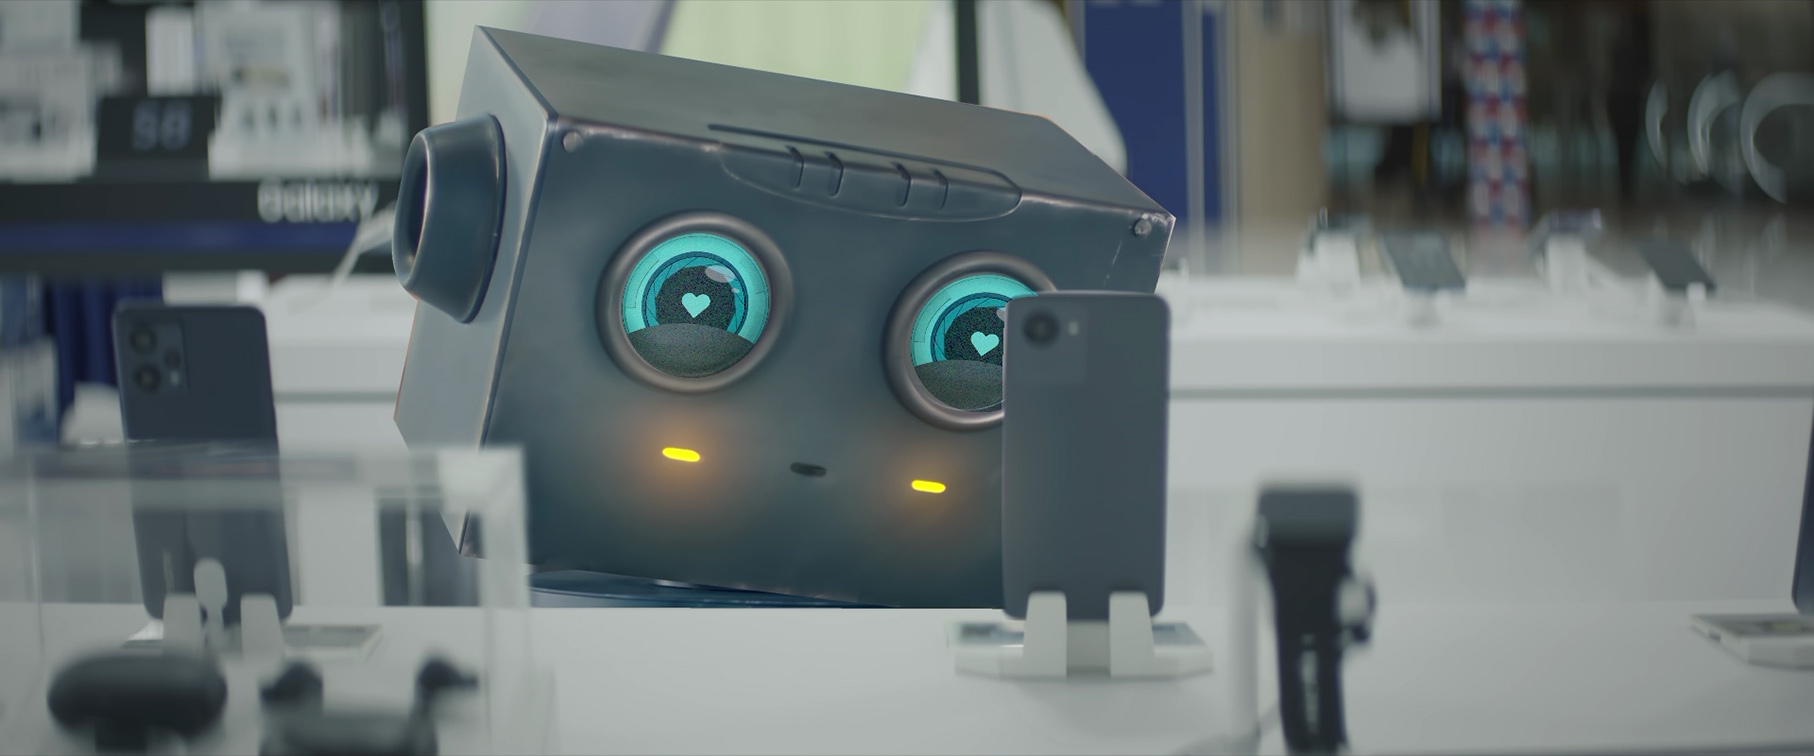 GoTyme Bank champions helpful humans, not chatbots, in a new campaign by IRIS Singapore